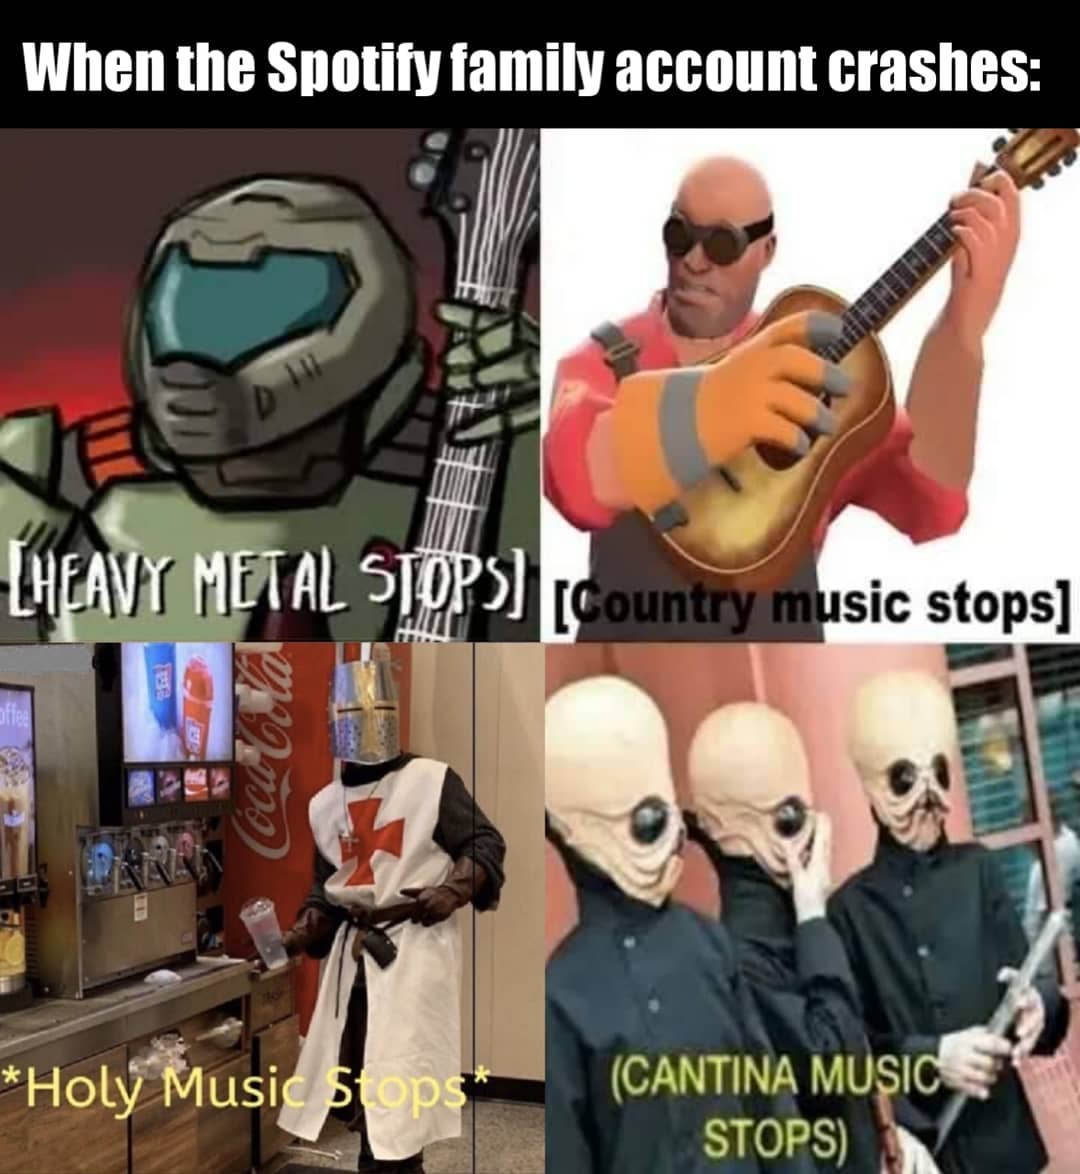 christian music stops meme - When the Spotify family account crashes Lheavy Metal Stop Country music stops offee Holy Music stops Cantina Music Stops